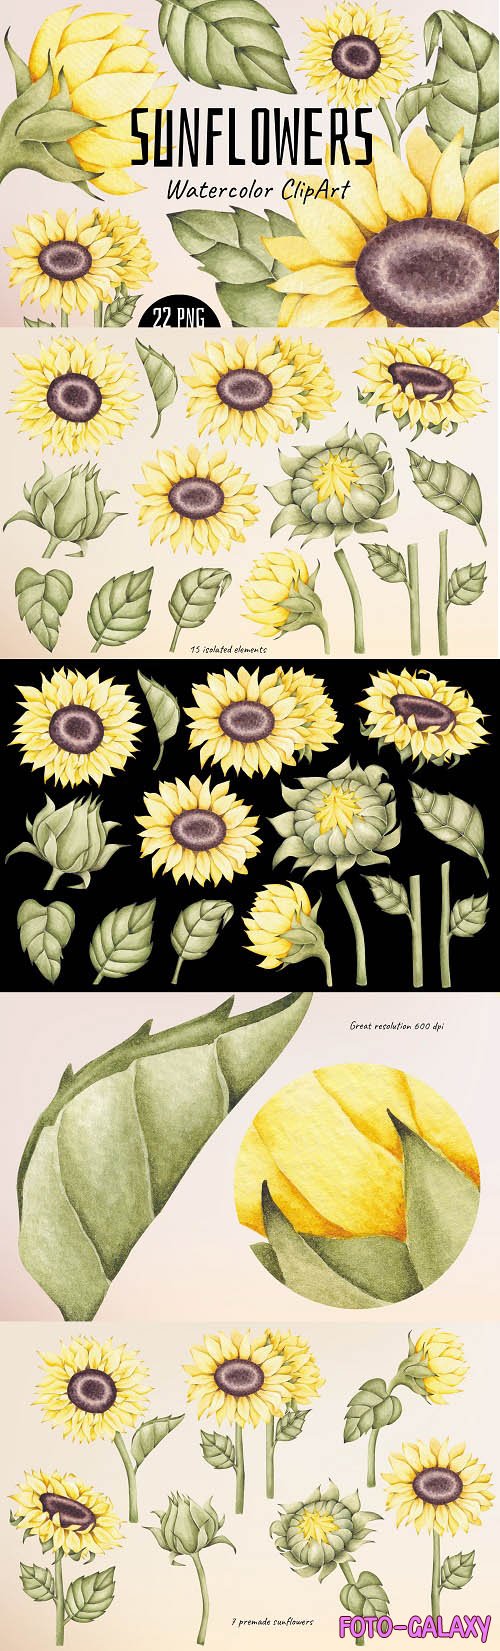 Watercolor ClipArt Sunflowers - 1436254